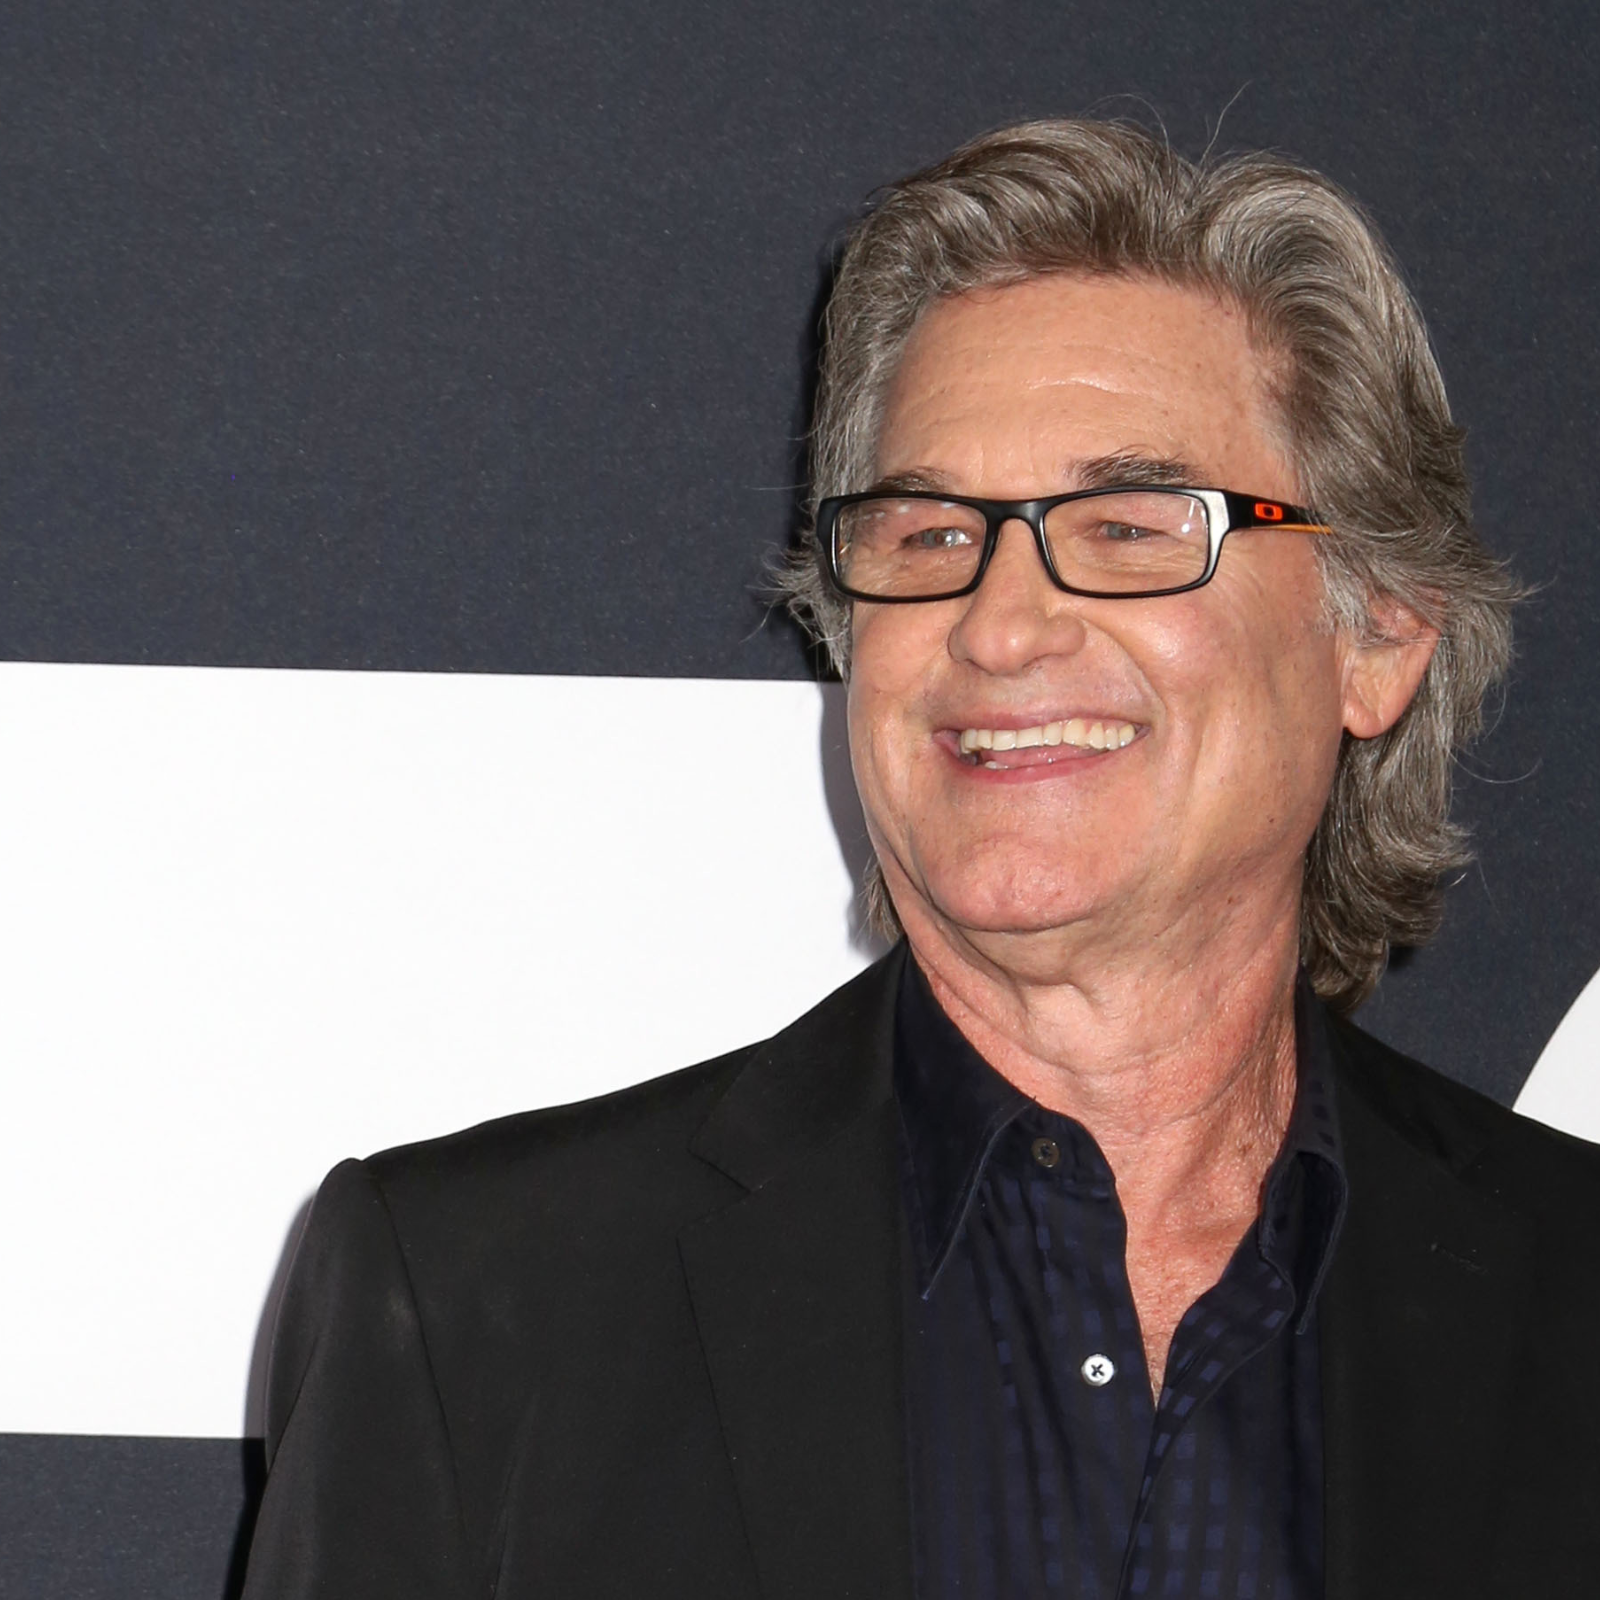 ‘Crypto’ Thriller Starring Kurt Russell in Post-Production - Producers Share Details